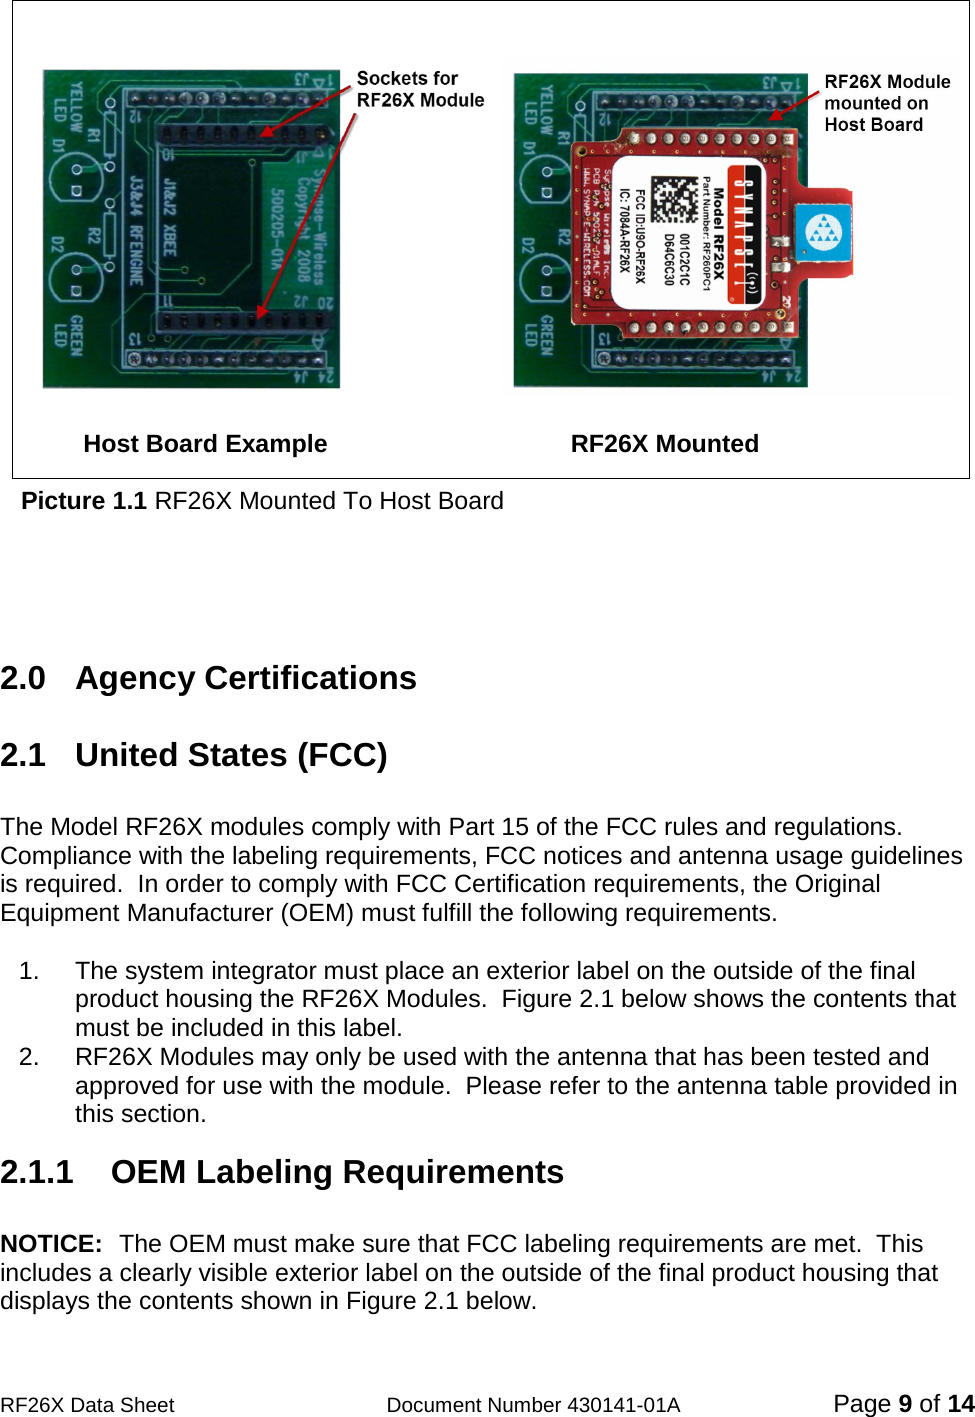                                            RF26X Data Sheet                  Document Number 430141-01A  Page 9 of 14                                                            Host Board Example                                   RF26X Mounted     Picture 1.1 RF26X Mounted To Host Board     2.0  Agency Certifications  2.1  United States (FCC)  The Model RF26X modules comply with Part 15 of the FCC rules and regulations.  Compliance with the labeling requirements, FCC notices and antenna usage guidelines is required.  In order to comply with FCC Certification requirements, the Original Equipment Manufacturer (OEM) must fulfill the following requirements.  1. The system integrator must place an exterior label on the outside of the final product housing the RF26X Modules.  Figure 2.1 below shows the contents that must be included in this label. 2. RF26X Modules may only be used with the antenna that has been tested and approved for use with the module.  Please refer to the antenna table provided in this section.  2.1.1    OEM Labeling Requirements  NOTICE:  The OEM must make sure that FCC labeling requirements are met.  This includes a clearly visible exterior label on the outside of the final product housing that displays the contents shown in Figure 2.1 below. 